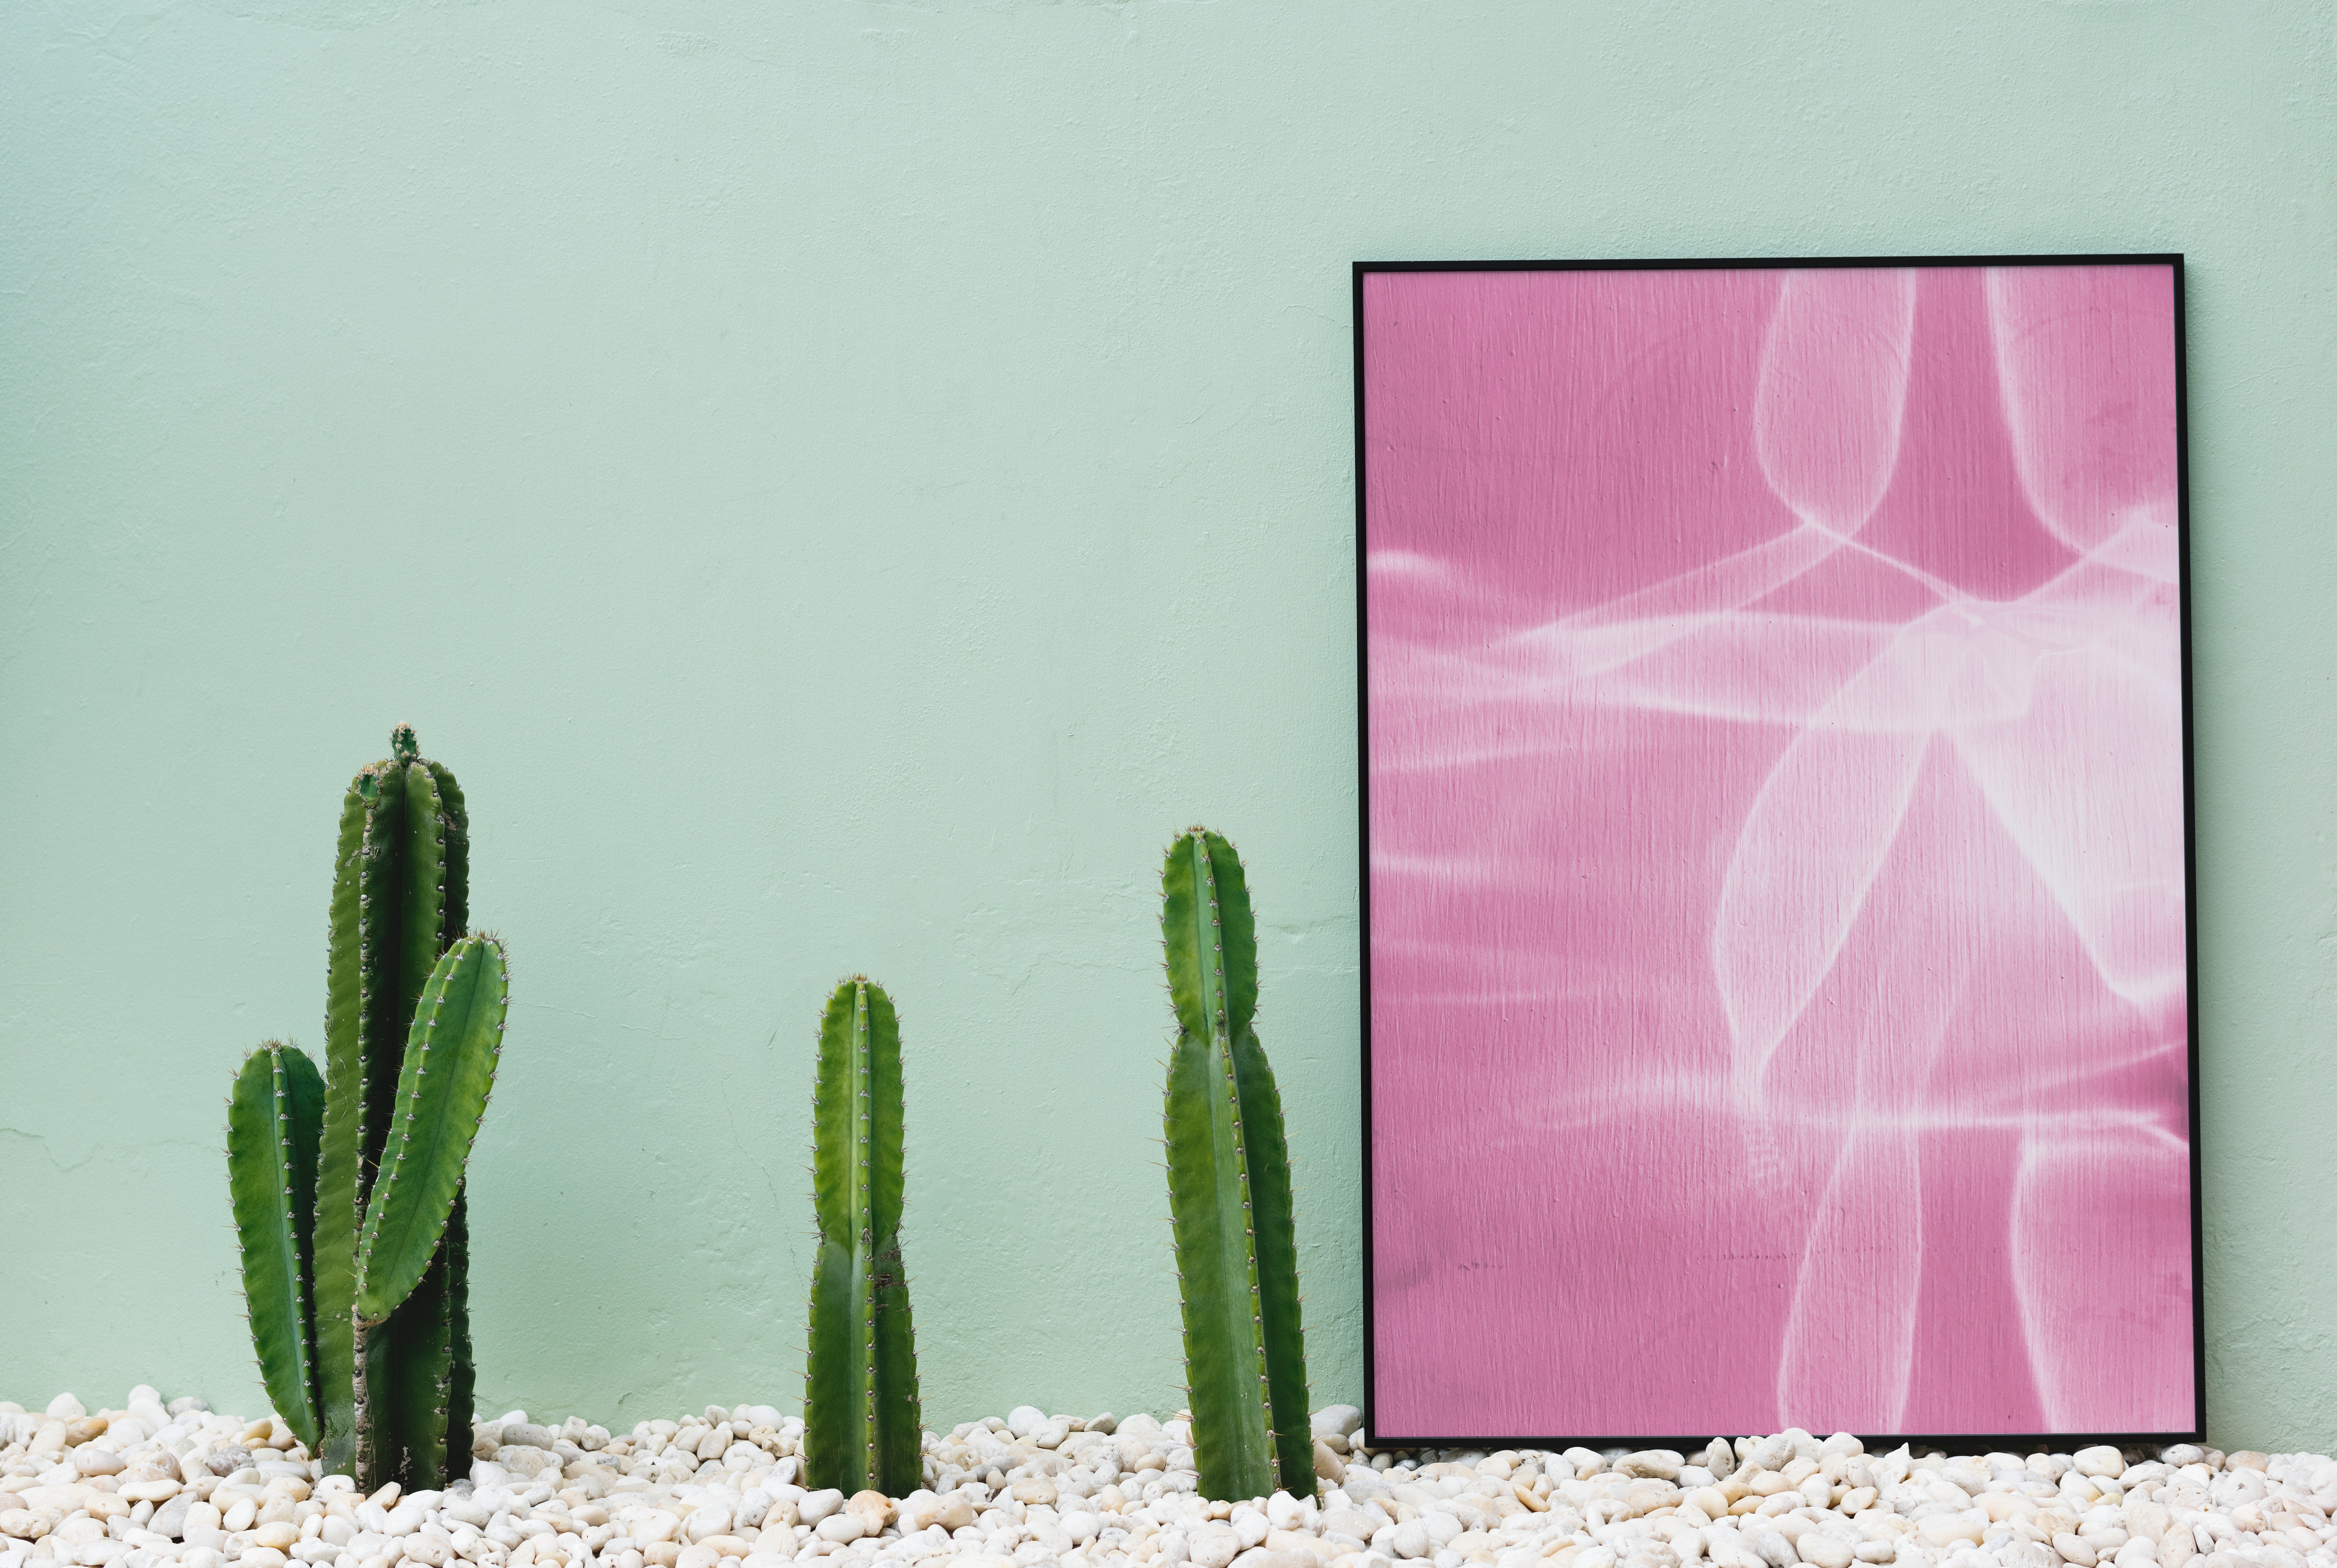 Pink and white abstract painting near green cactus photo